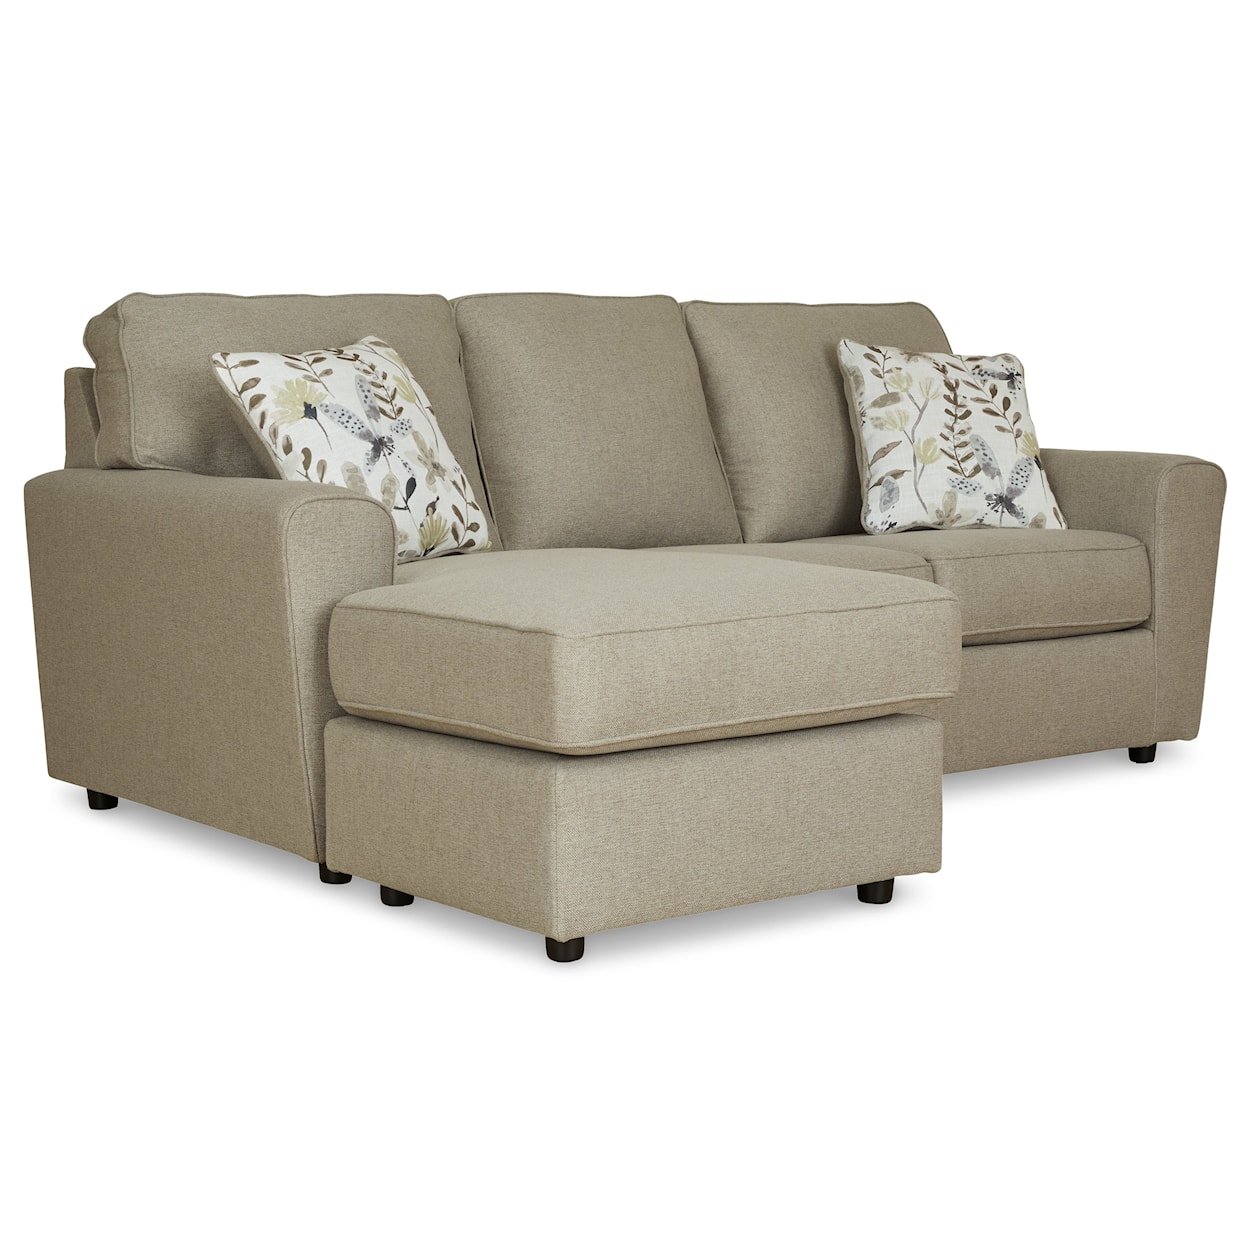 Signature Design by Ashley Renshaw Sofa Chaise